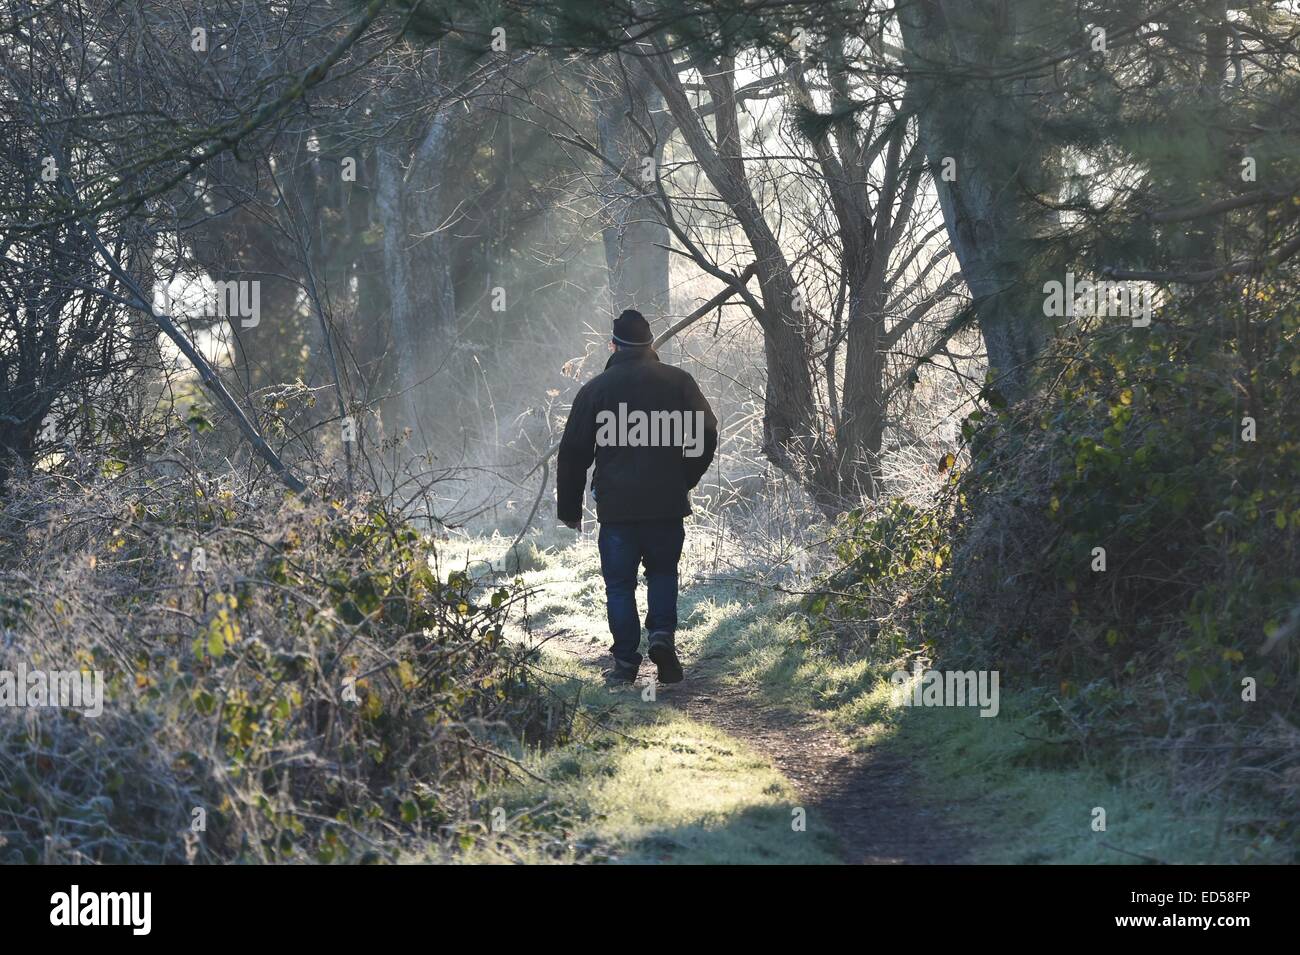 Aberystwyth wales UK   Sunday 28 December 2014   A cold clear frosty morning in Aberystwyth Wales   Photo keith morris / Alamy live news Stock Photo